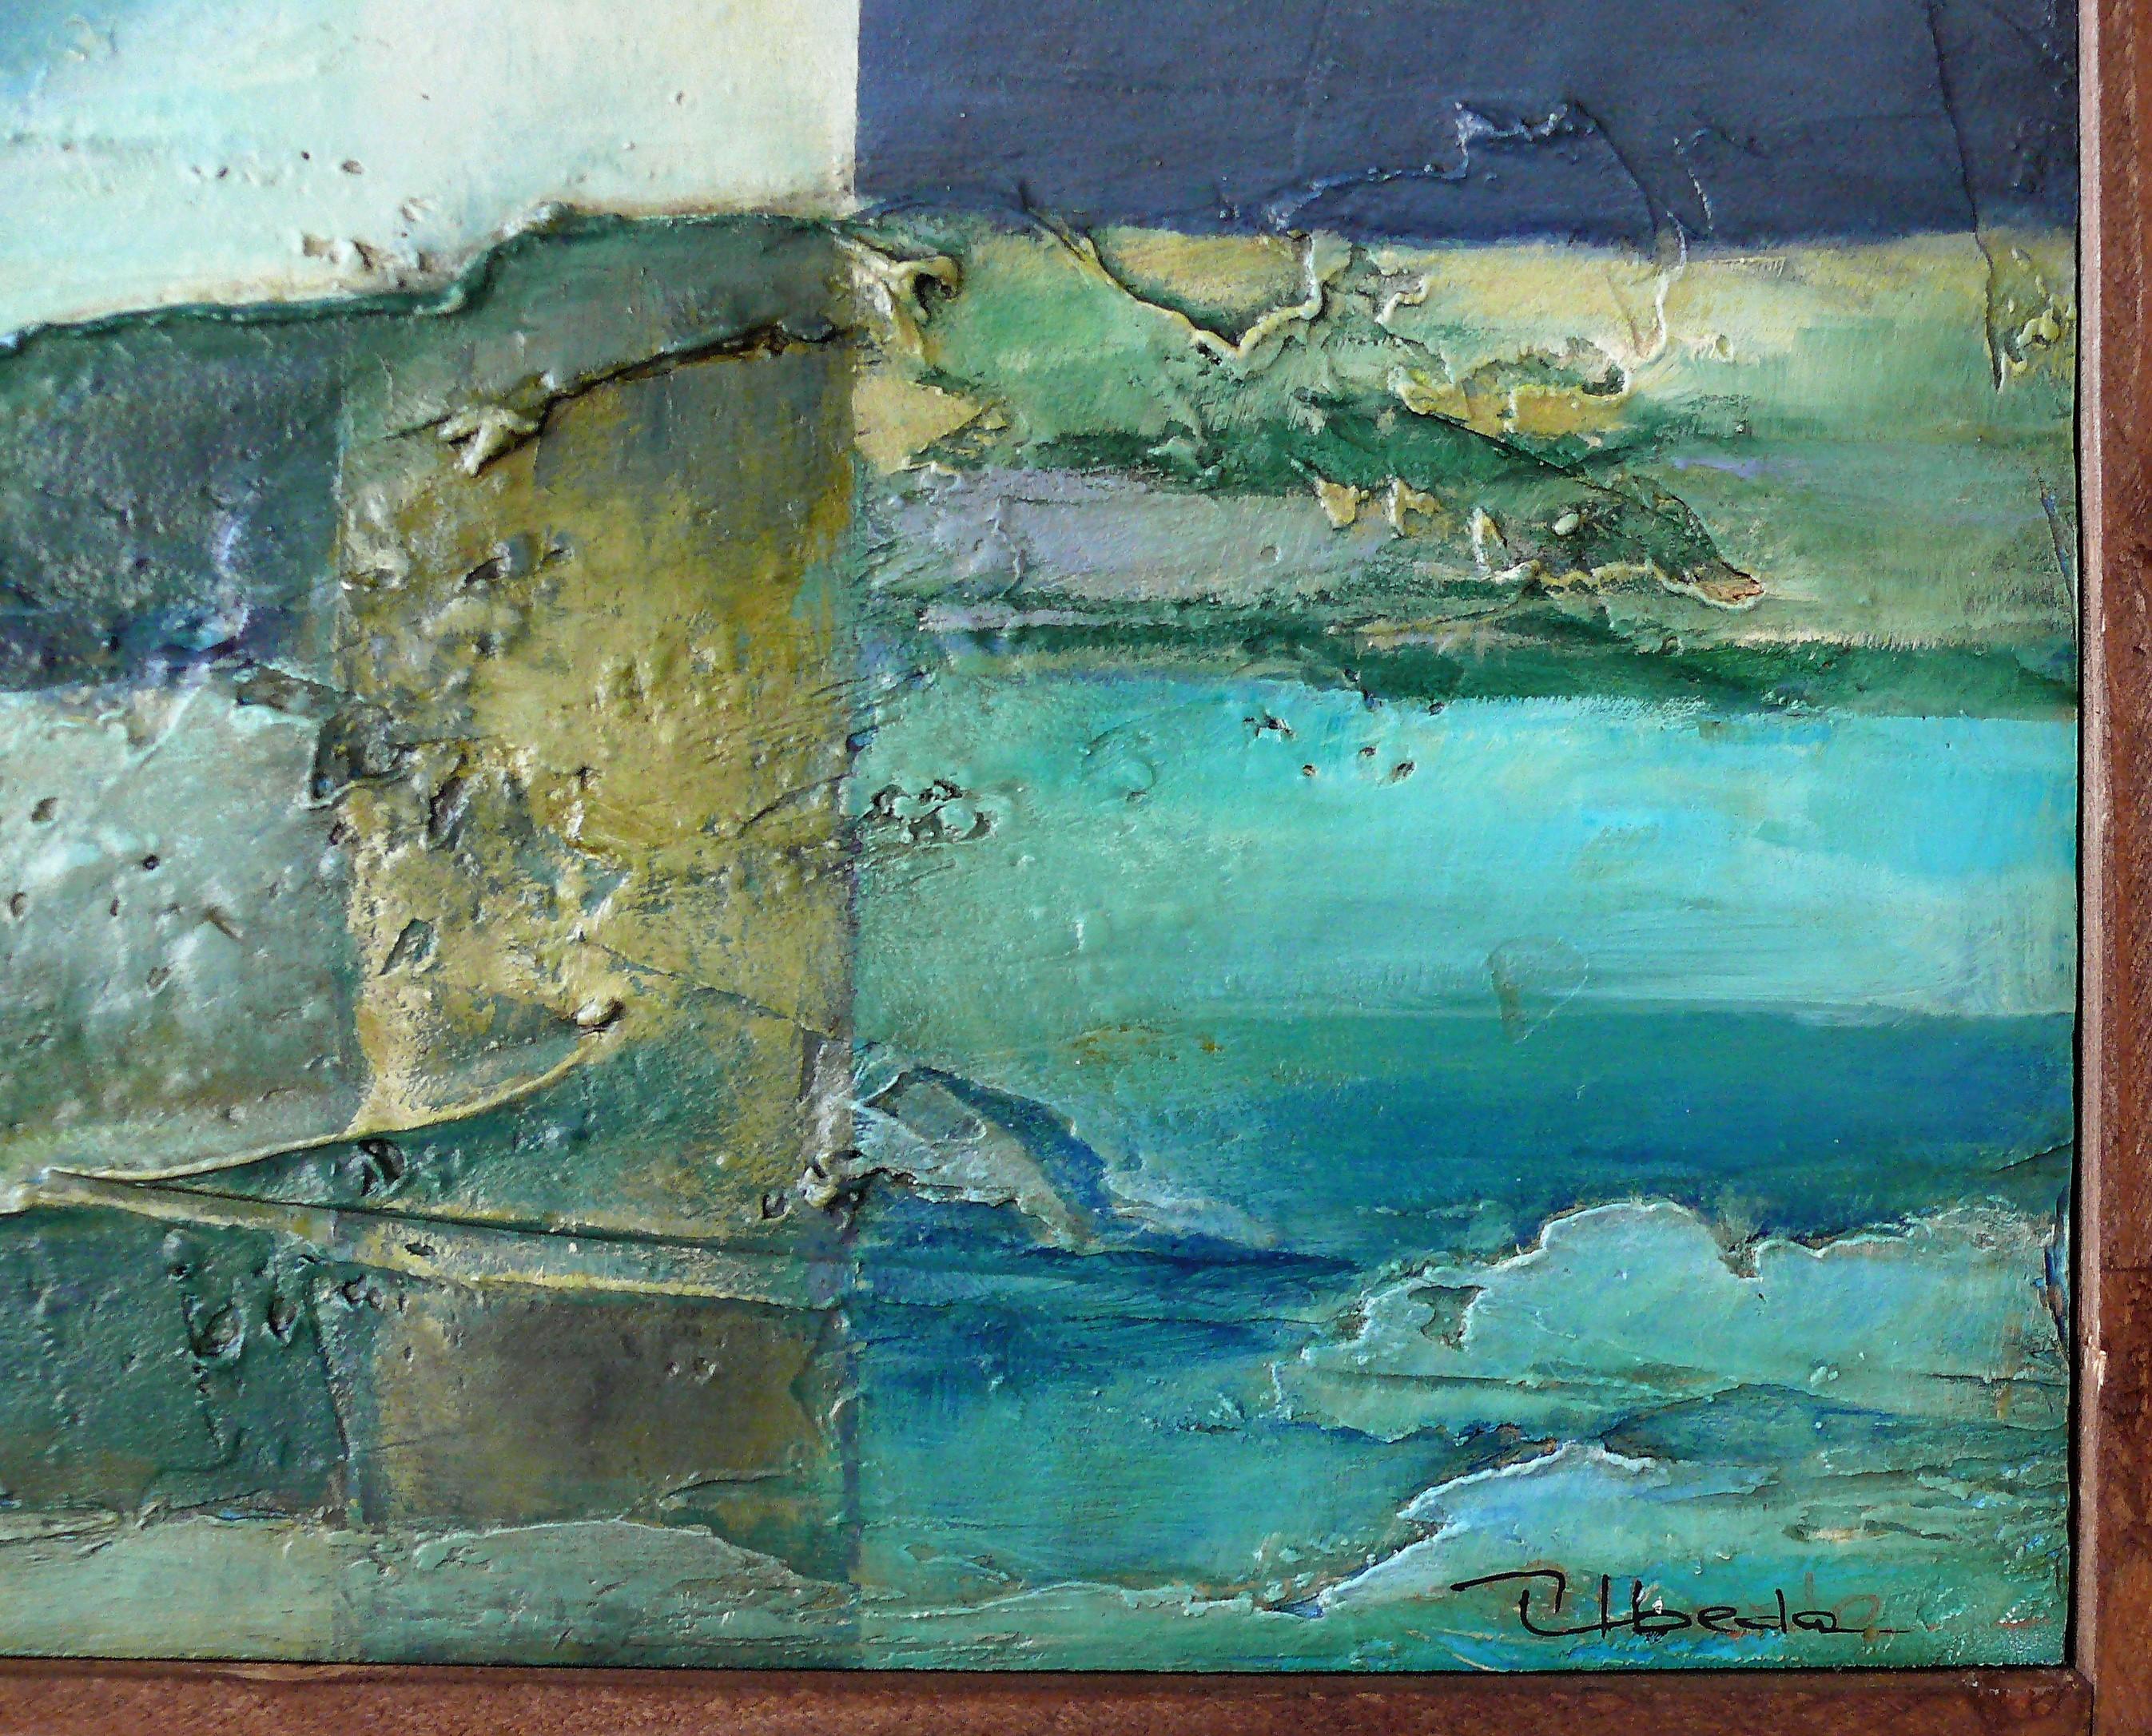 Restless Sky (Landscape)
The fragmentation of the planes and the light creates six different landscapes on the same horizon. The reliefs transform the sky into a restless fluid.
(The artist frames almost all his paintings with a wooden strip between